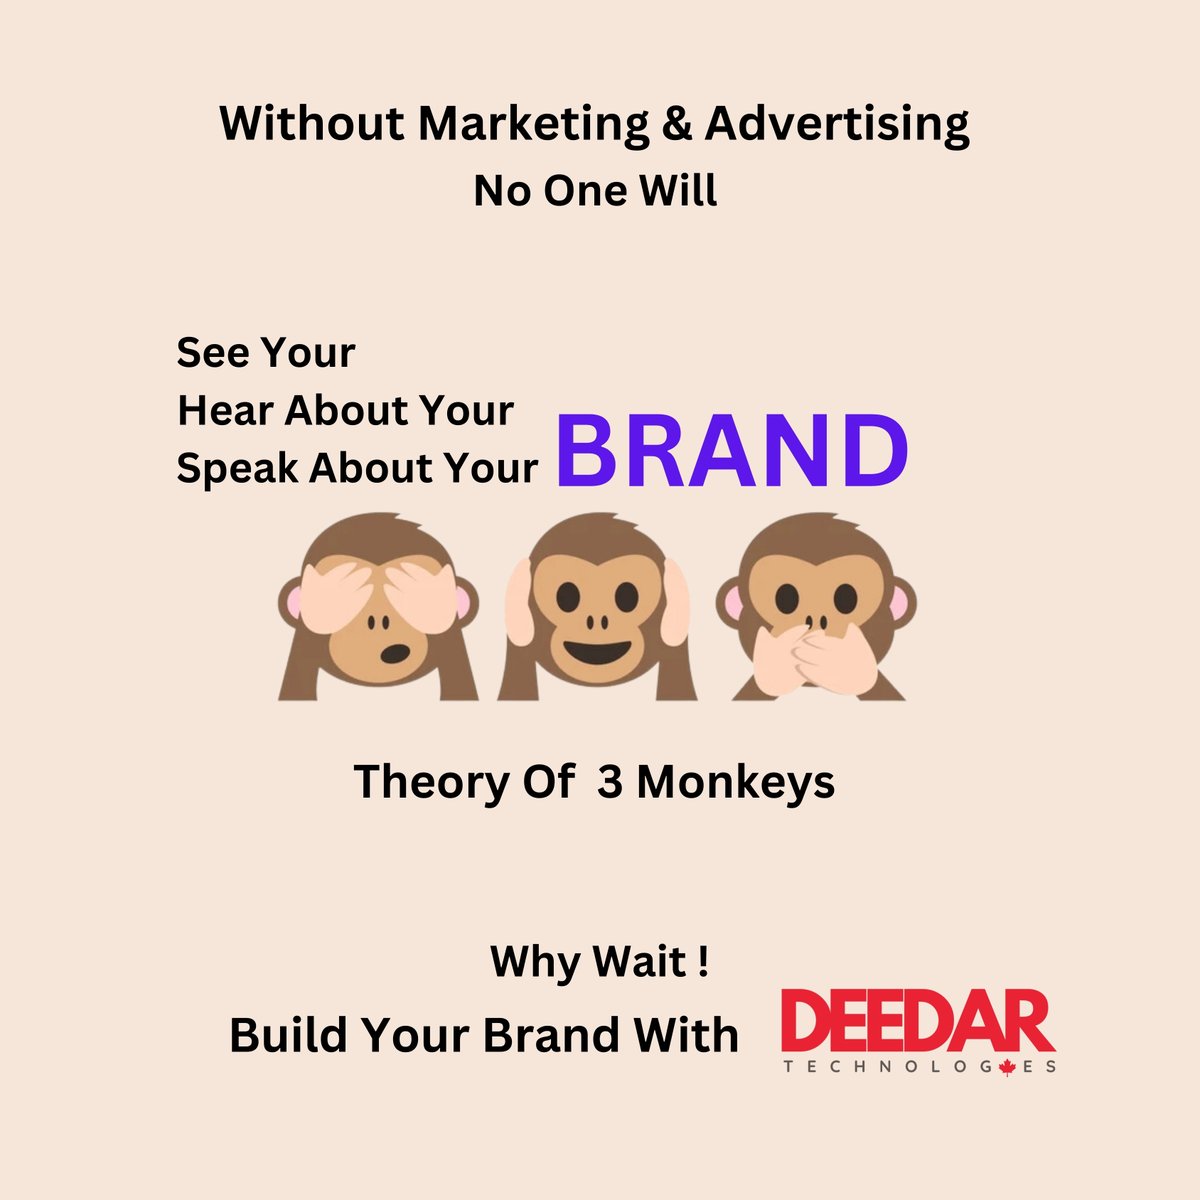 At 3 Monkeys Brand Theory, we understand the essence of branding: without marketing, your brand remains unseen, unheard, and unspoken. 

#DeedarTechnologies #DeedarTech #DigitalMarketing #BrandStrategy #BrandingStrategy #Branding #BrandVisibility #DigiGrowth #BrandTheory